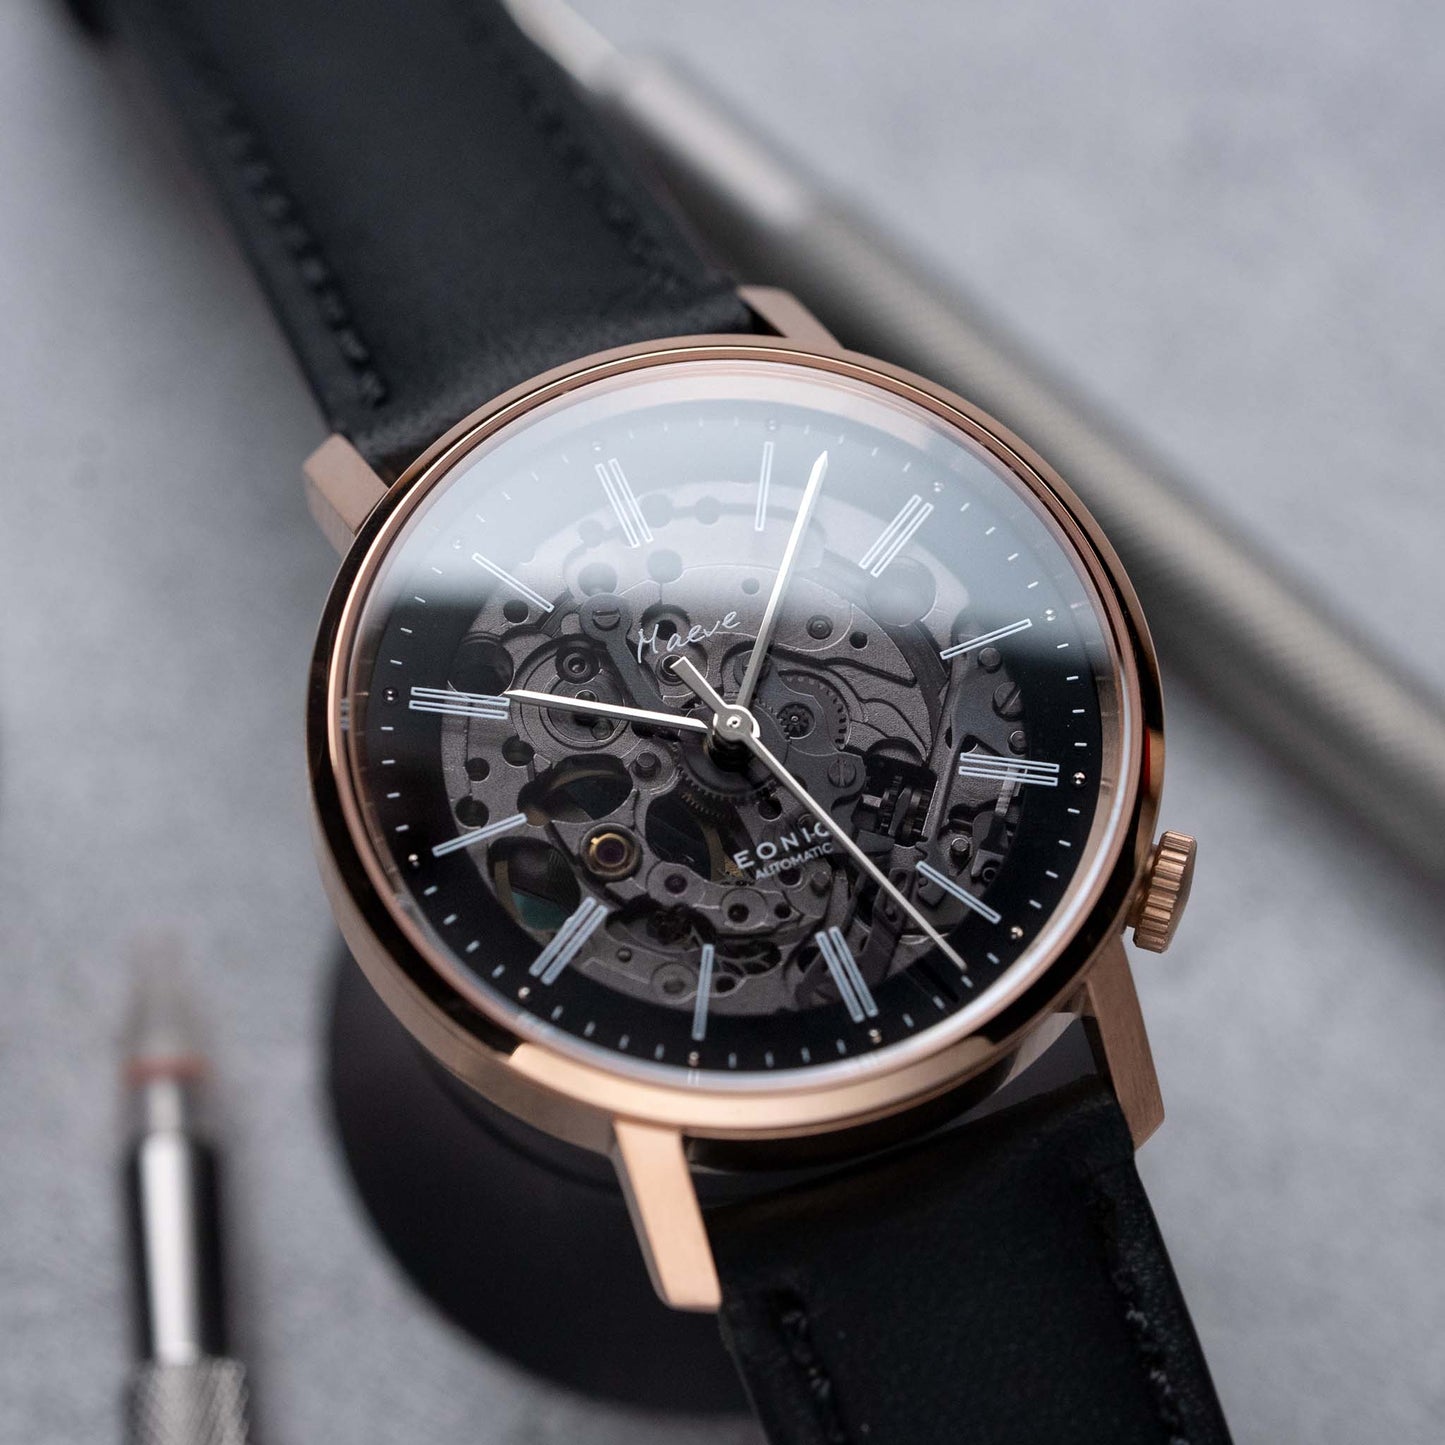 EONIQ custom watch - ALSTER series with sapphire dial - rose gold case 